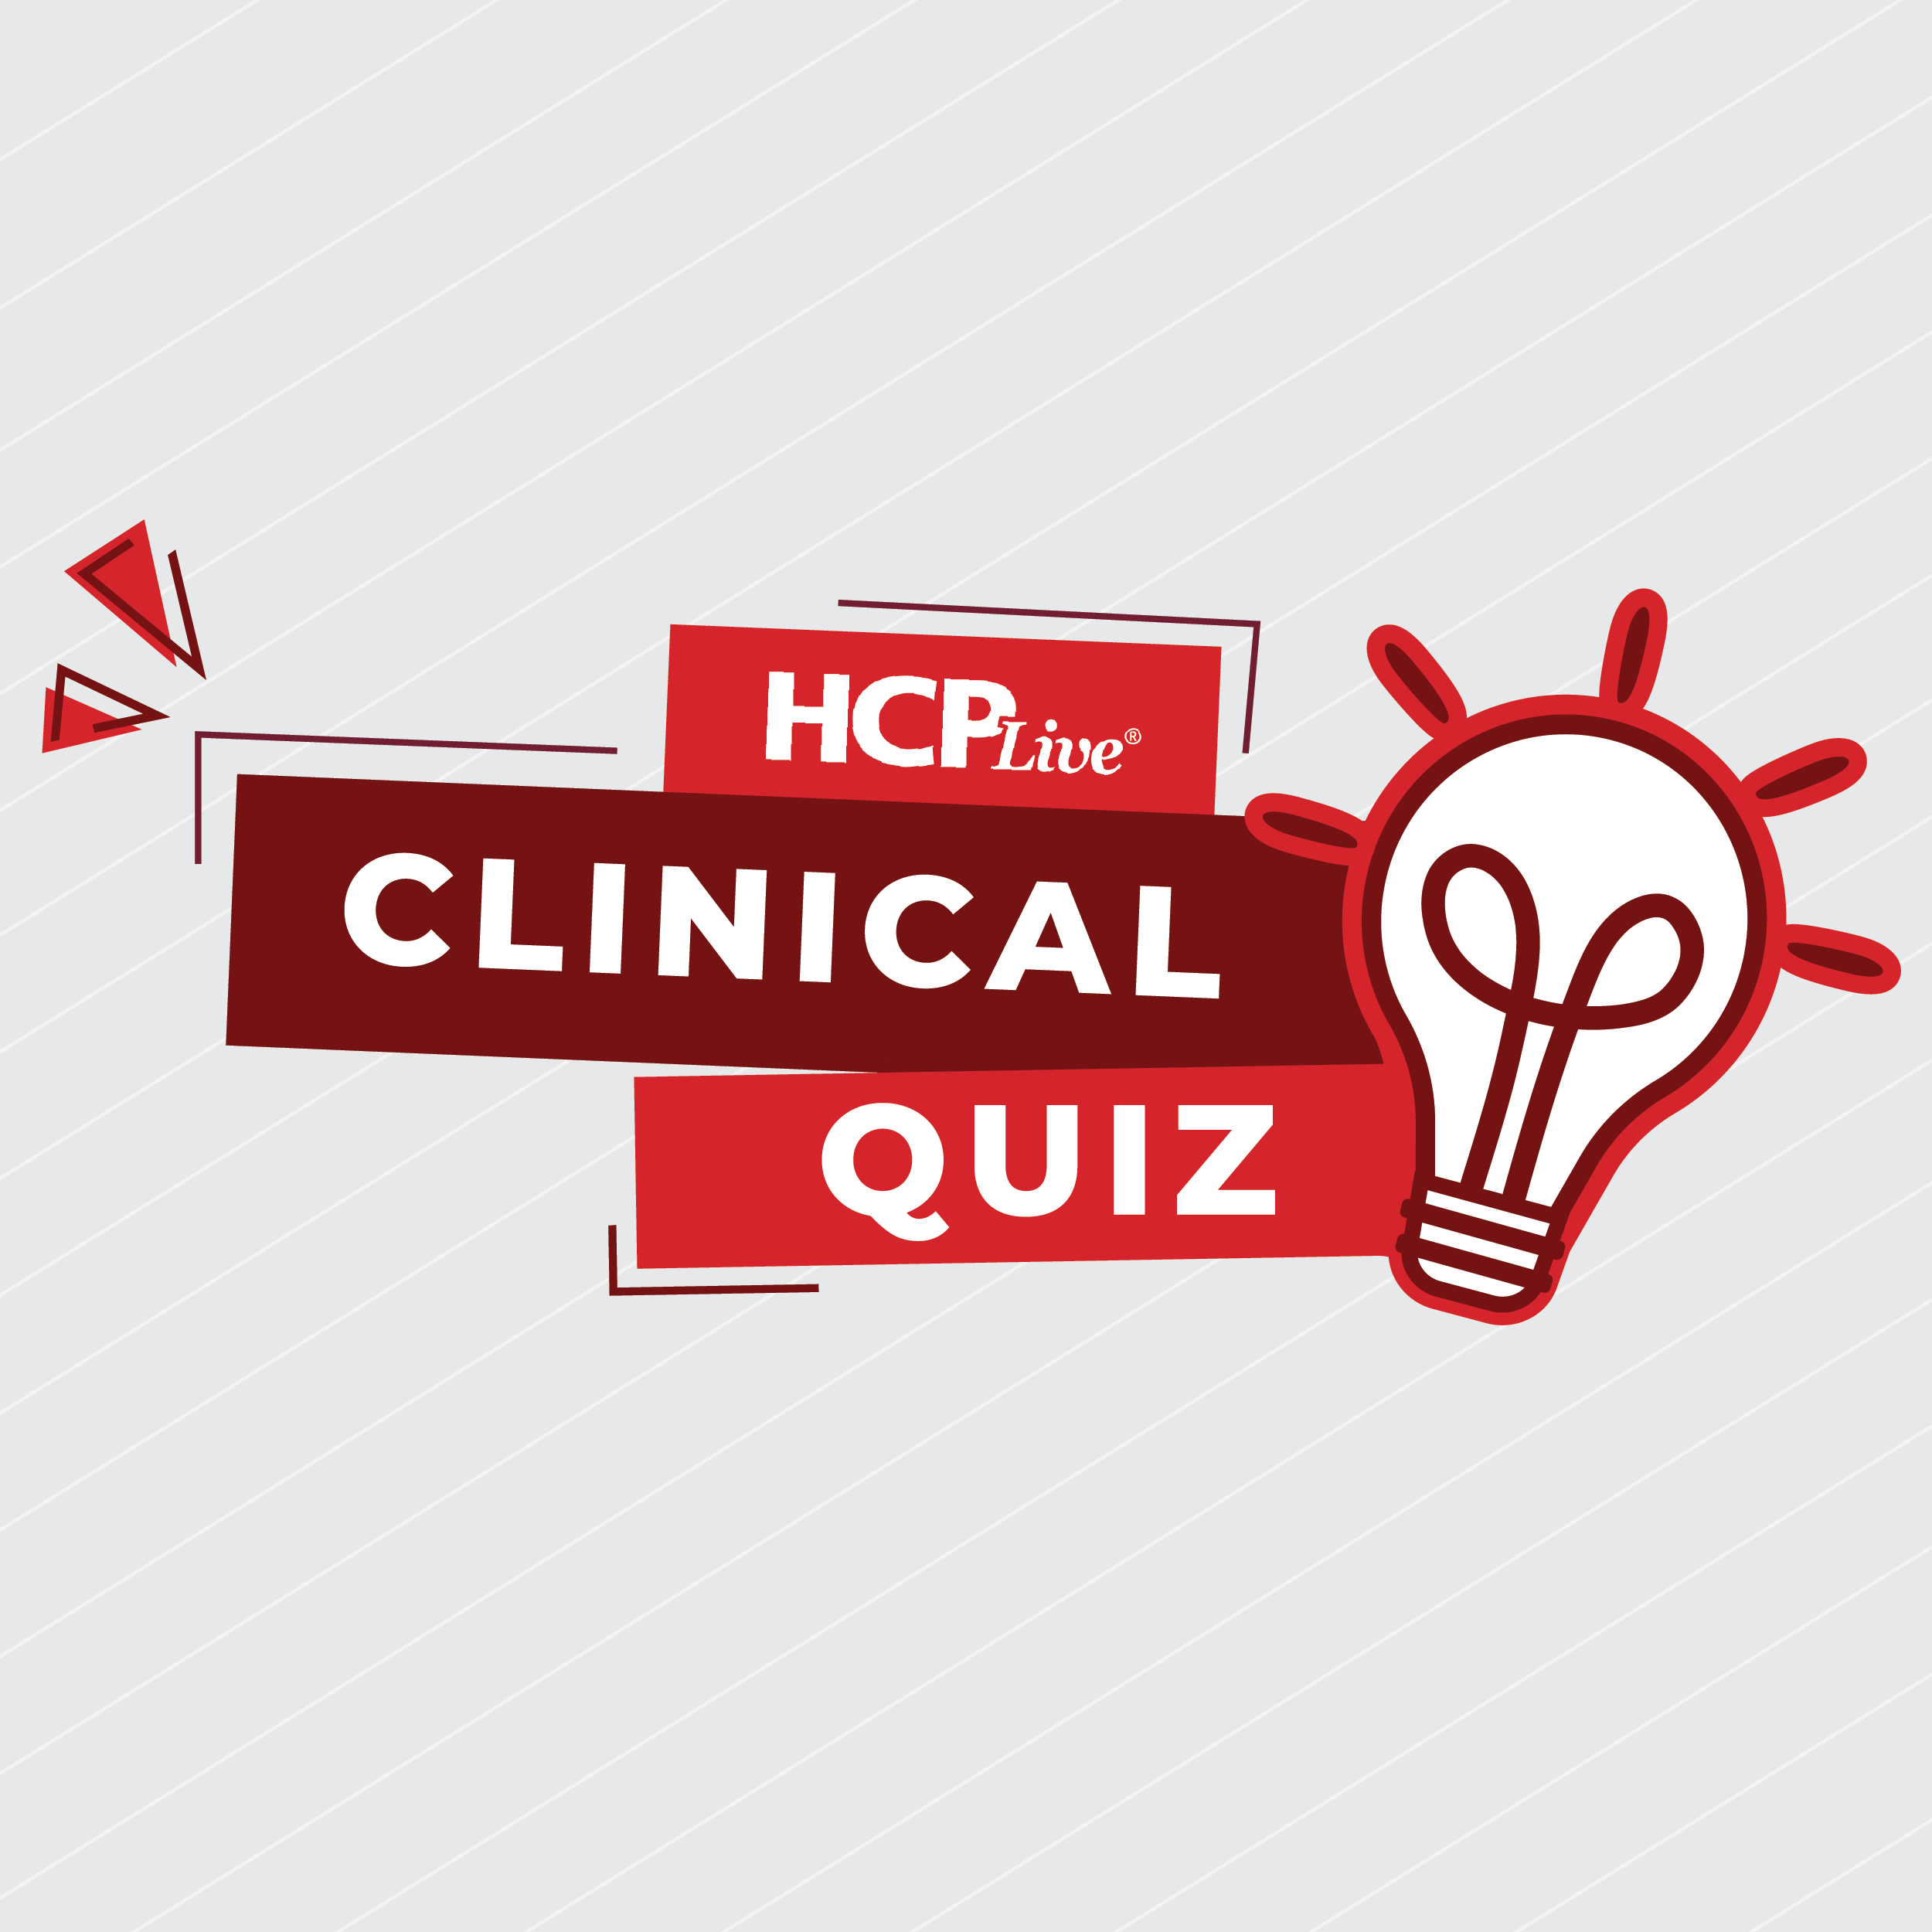 Clinical quiz thumbnail from HCPLive